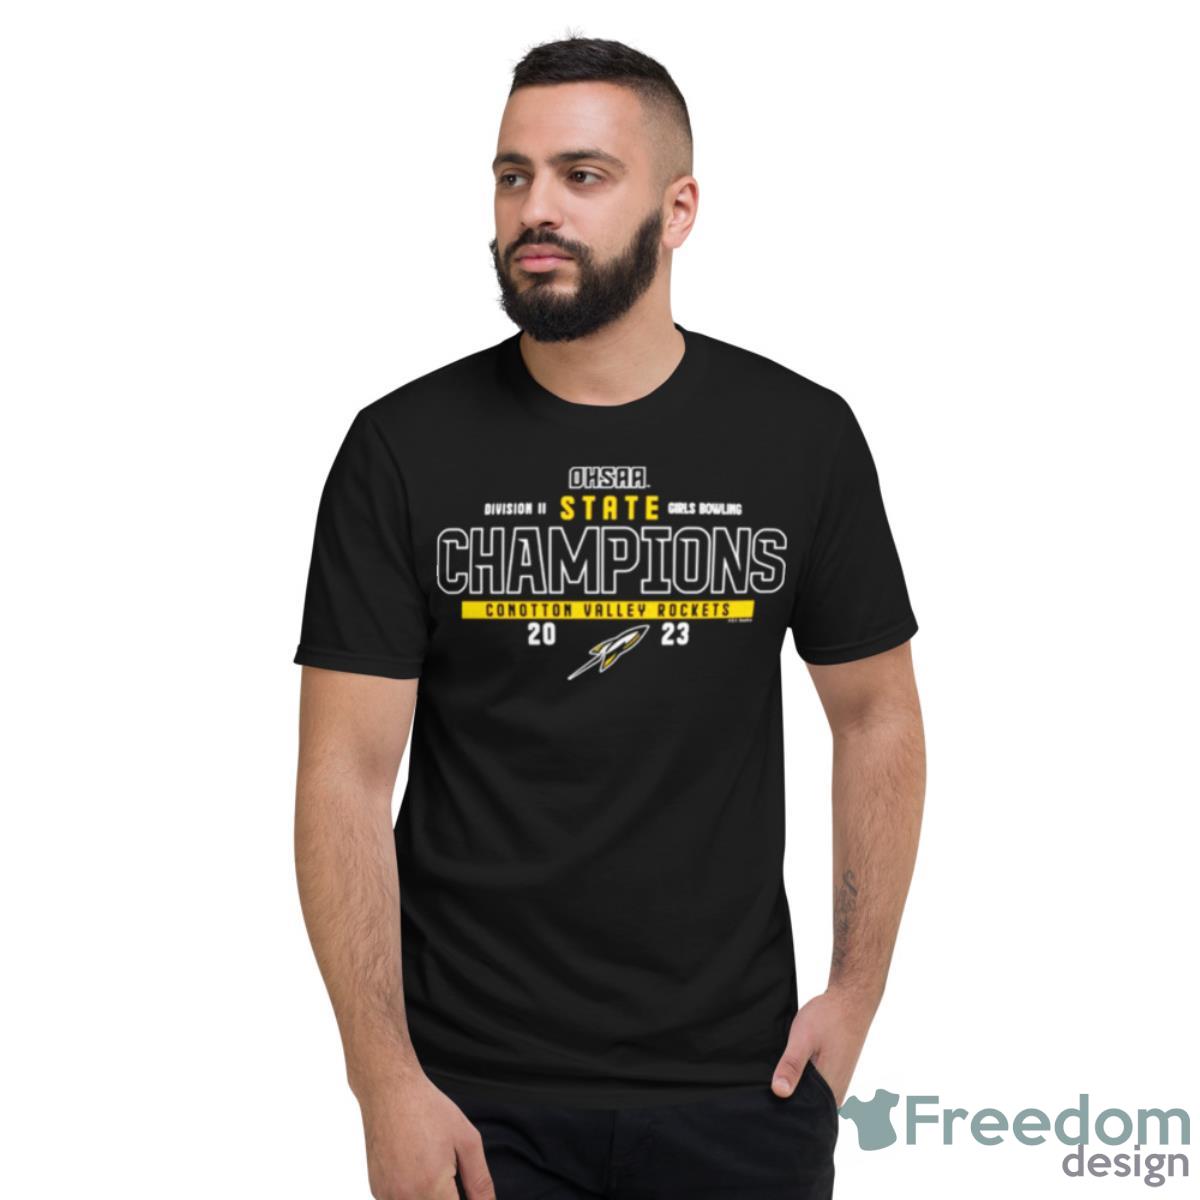 2023 Ohsaa Girls Bowling Division II State Champions Conotton Valley Rockets Shirt